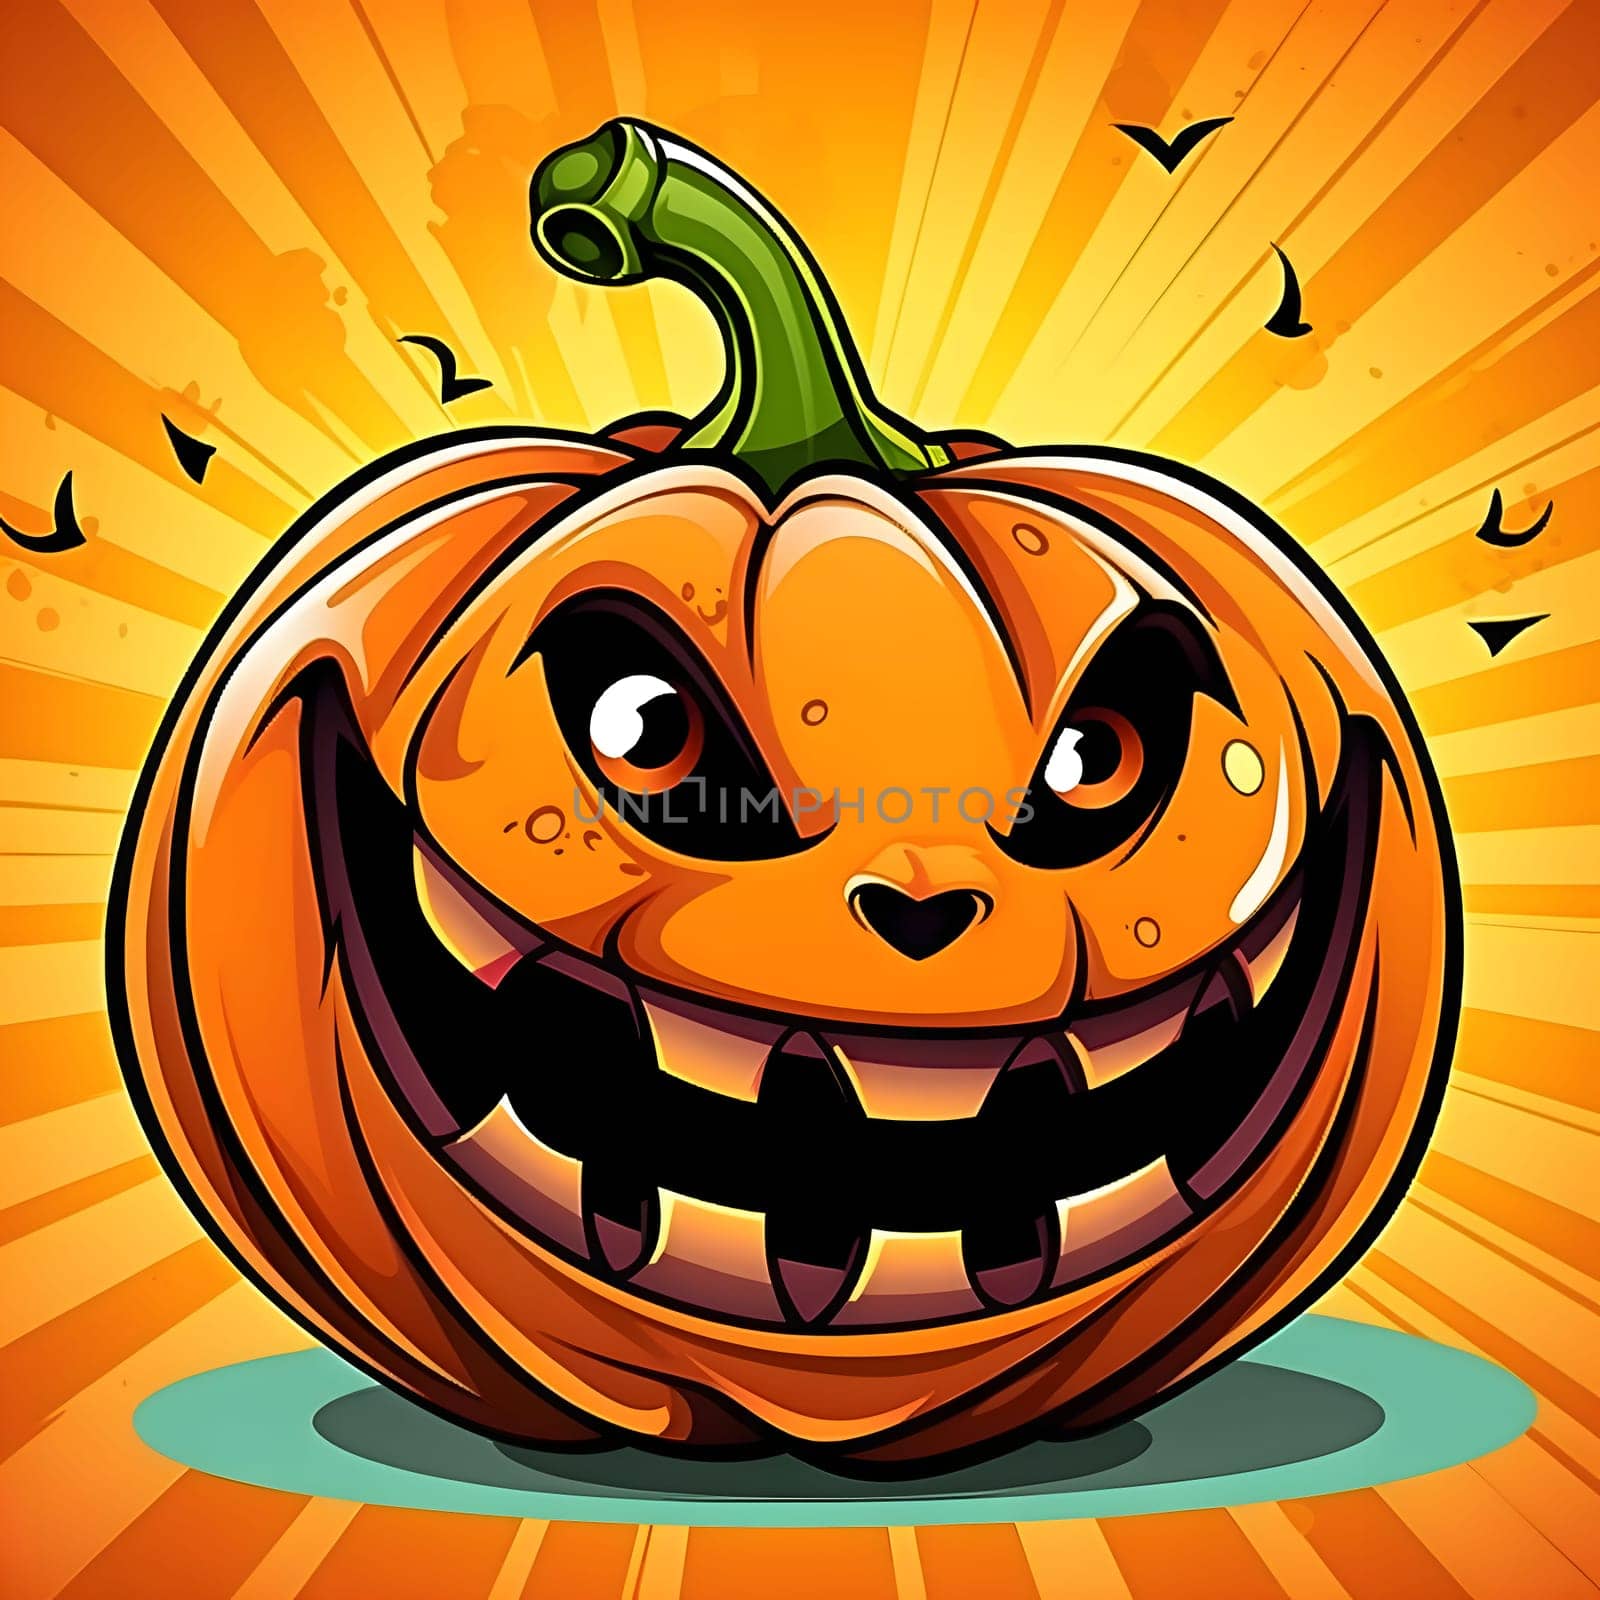 Sinister jack-o-lantern pumpkin with a dark smile on a bright radiant background, a Halloween image. Atmosphere of darkness and fear.